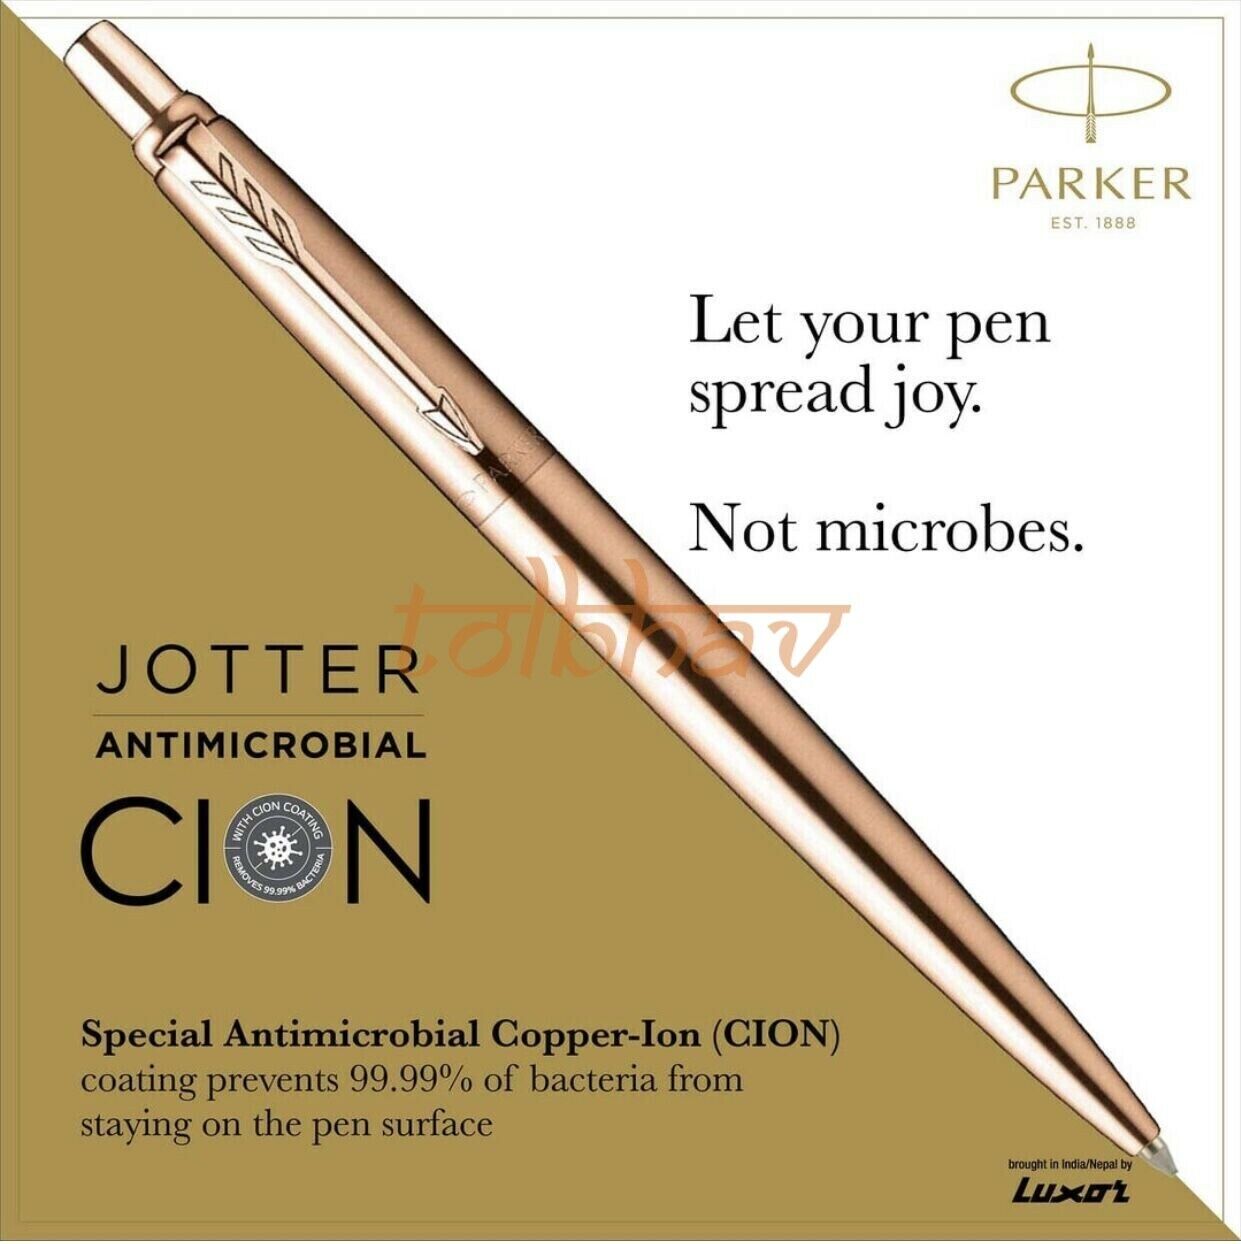 Parker Anti Microbial Jotter Copper Ion Ball Point Pen - CION Coated